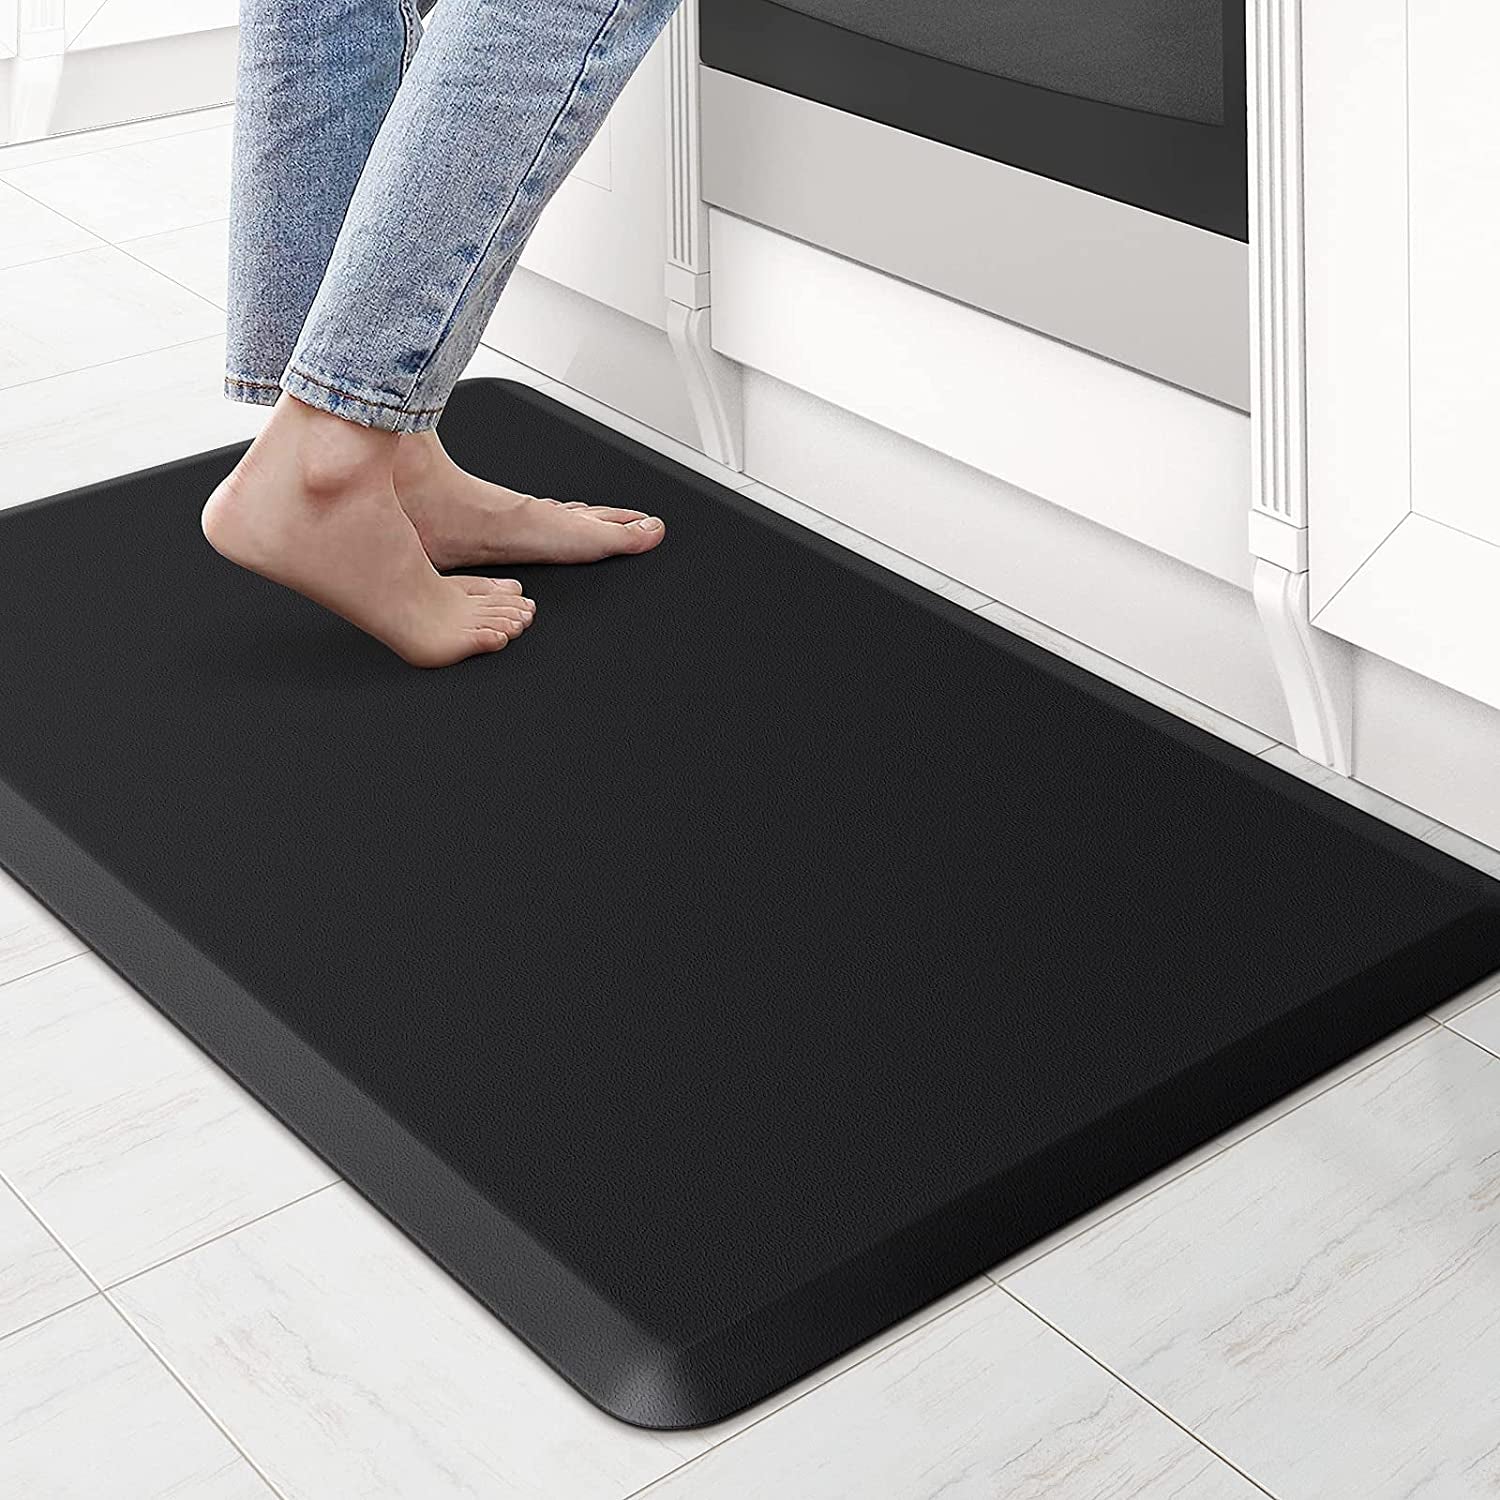 Kitchen Mat Cushioned anti Fatigue Rug 17.3"X28" Waterproof, Non Slip, Standing and Comfort Desk/Floor Mats for House Sink Office (Black)